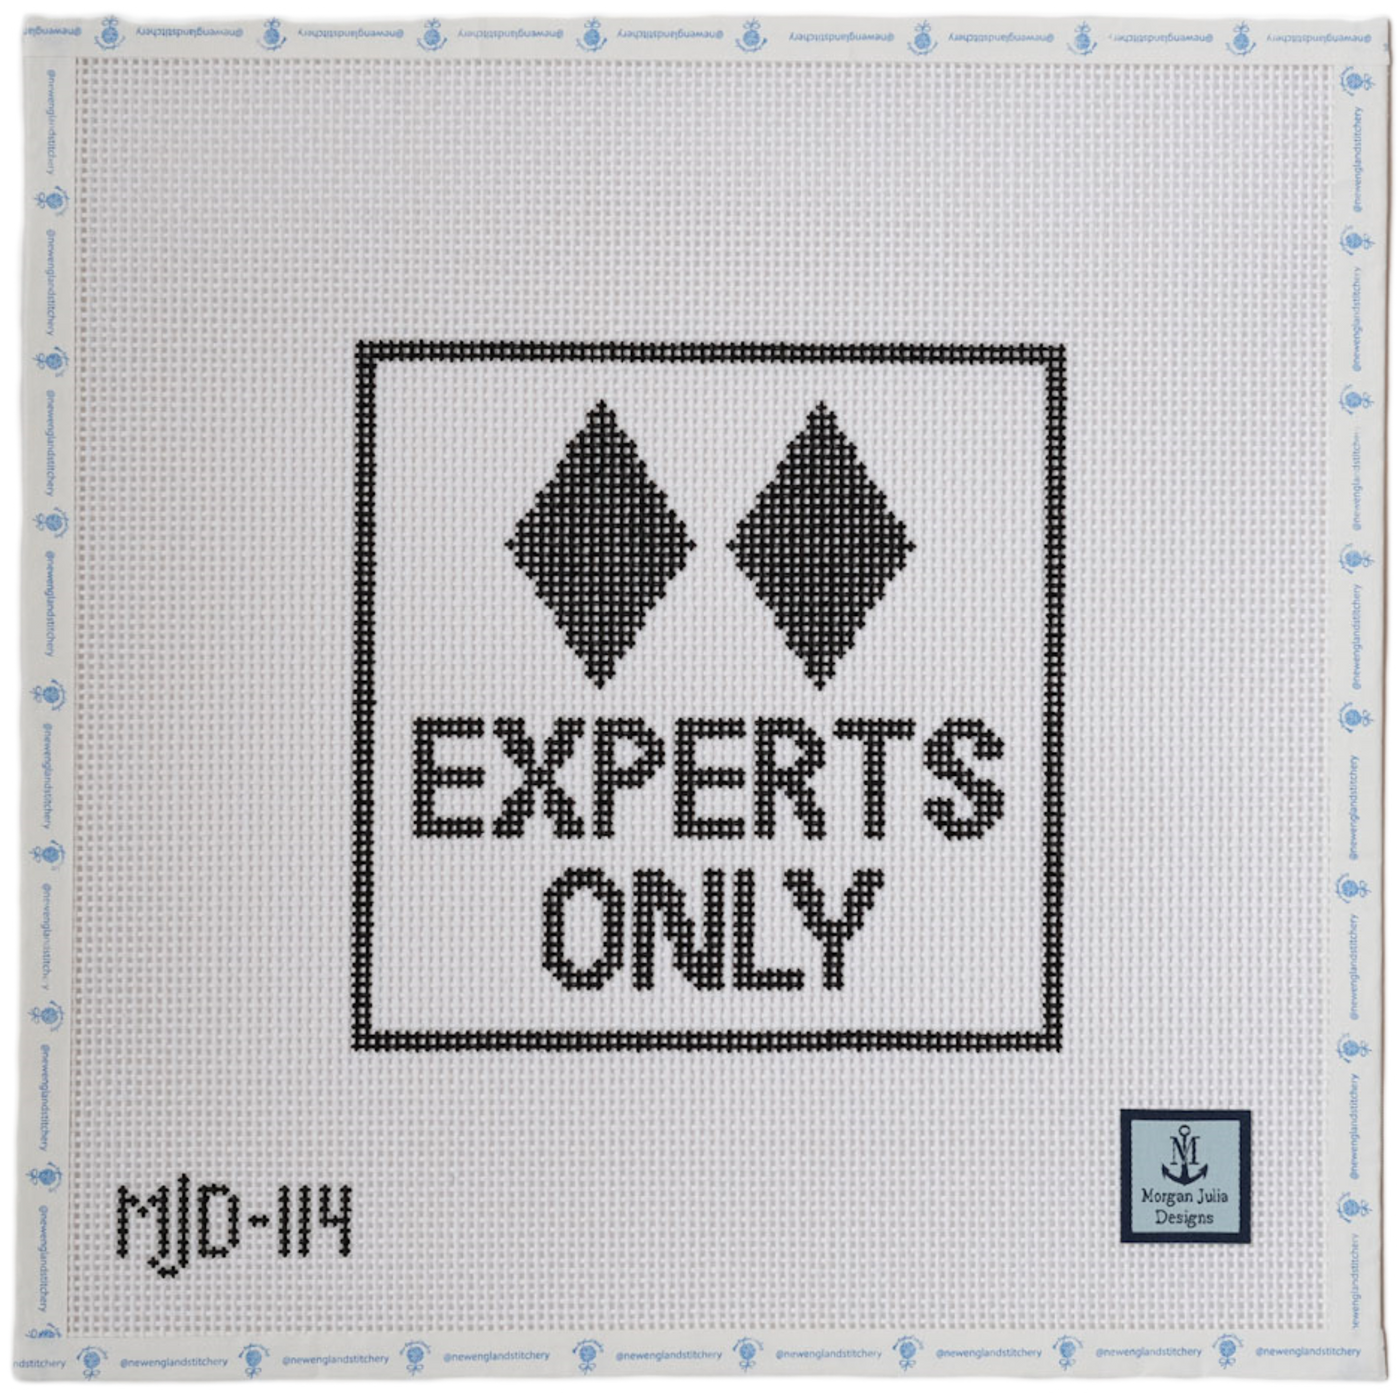 Experts Only